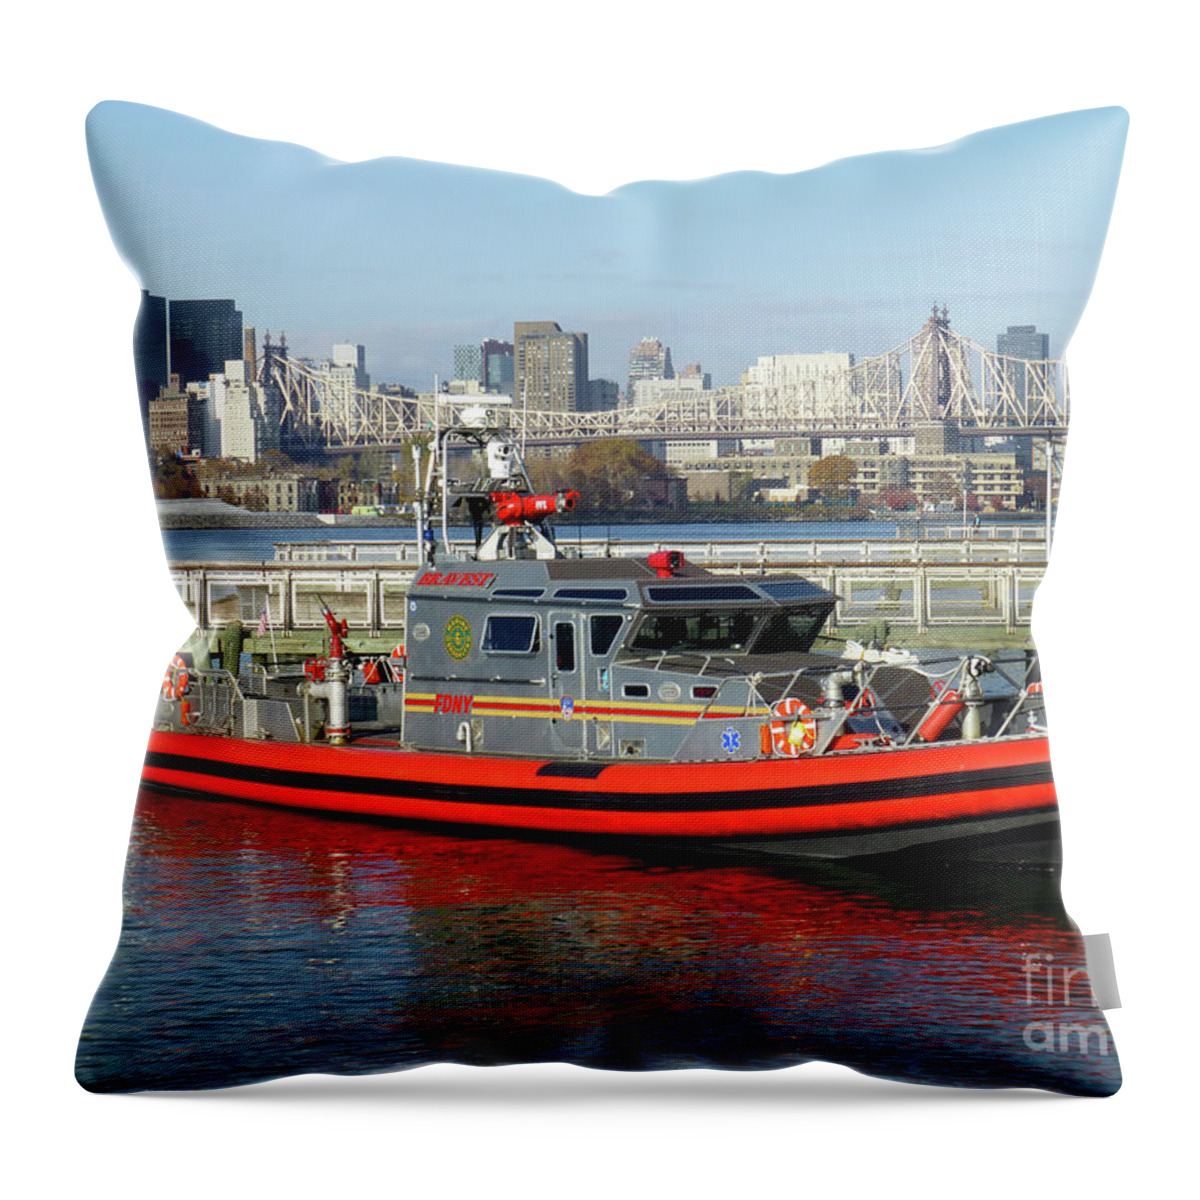 Fdny Throw Pillow featuring the photograph The Fireboat the Bravest by Steven Spak